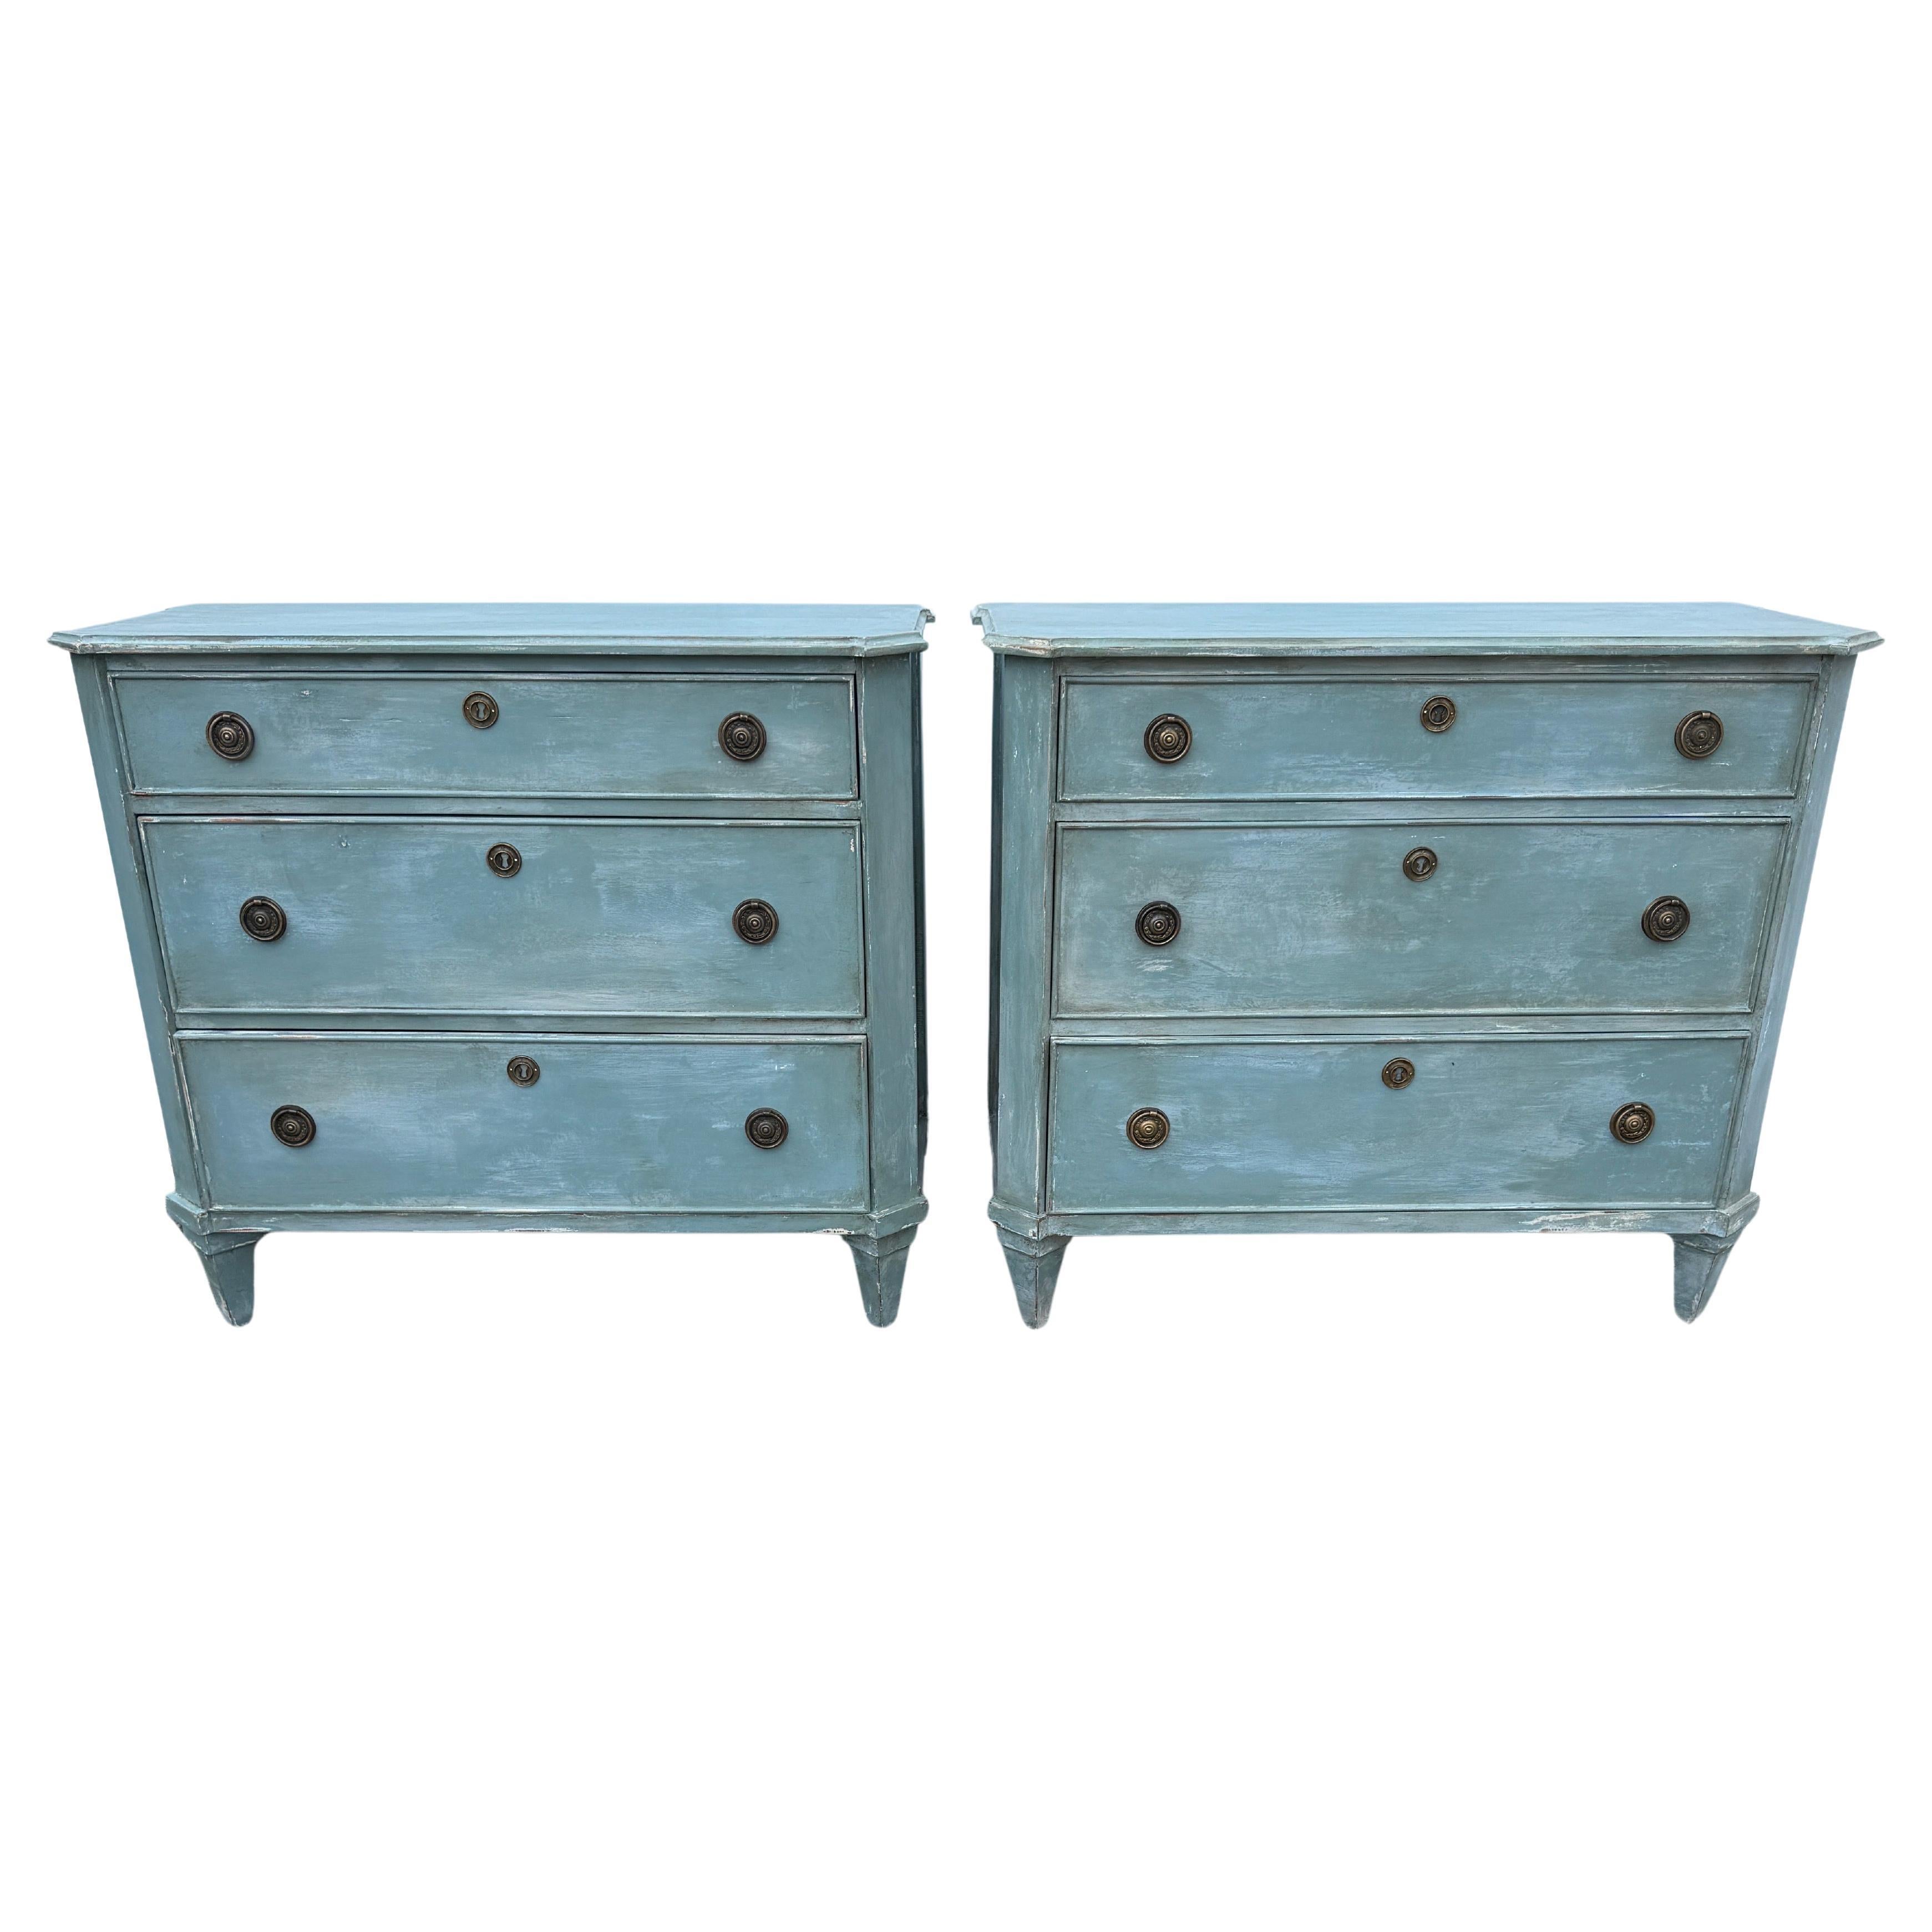 Blue Painted Swedish Gustavian Style 3 Drawer Chest Bureau, A Pair

This pair of three drawer bureaus are based on an 18th Century Gustavian antique chest. They are handmade and hand painted with solid wood legs and frame. The detailing is